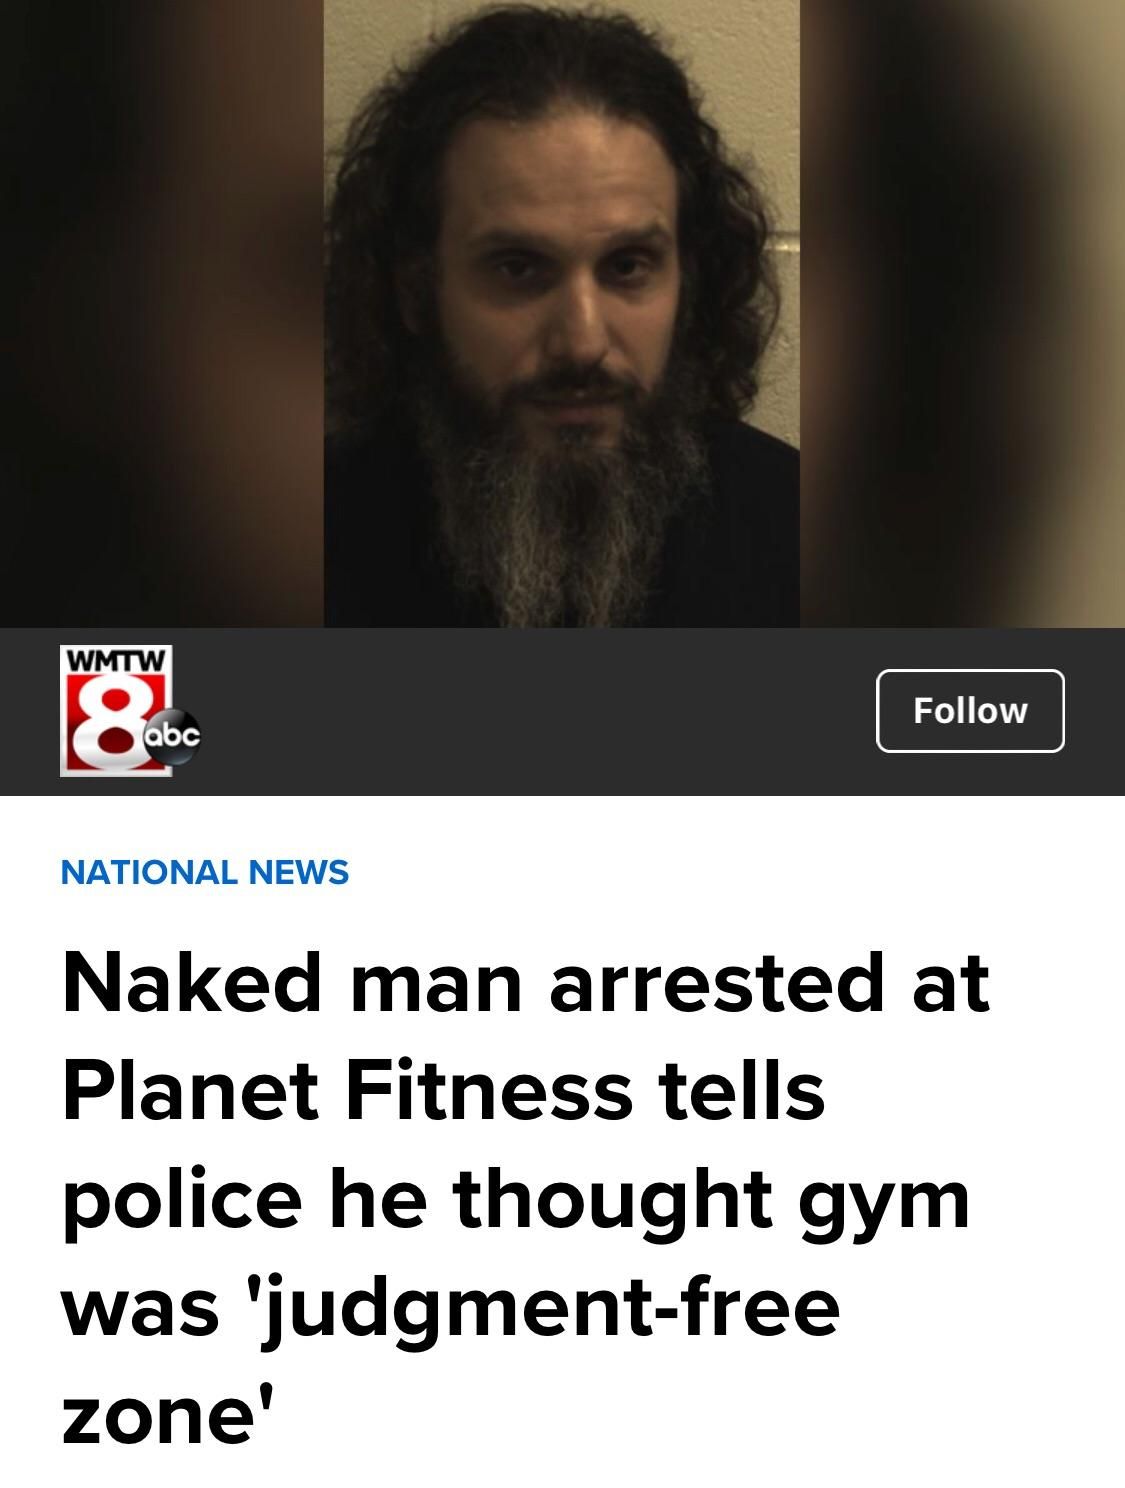 daily dose of awesome - beard - Wmtw 8 abc National News Naked man arrested at Planet Fitness tells police he thought gym was 'judgmentfree zone'